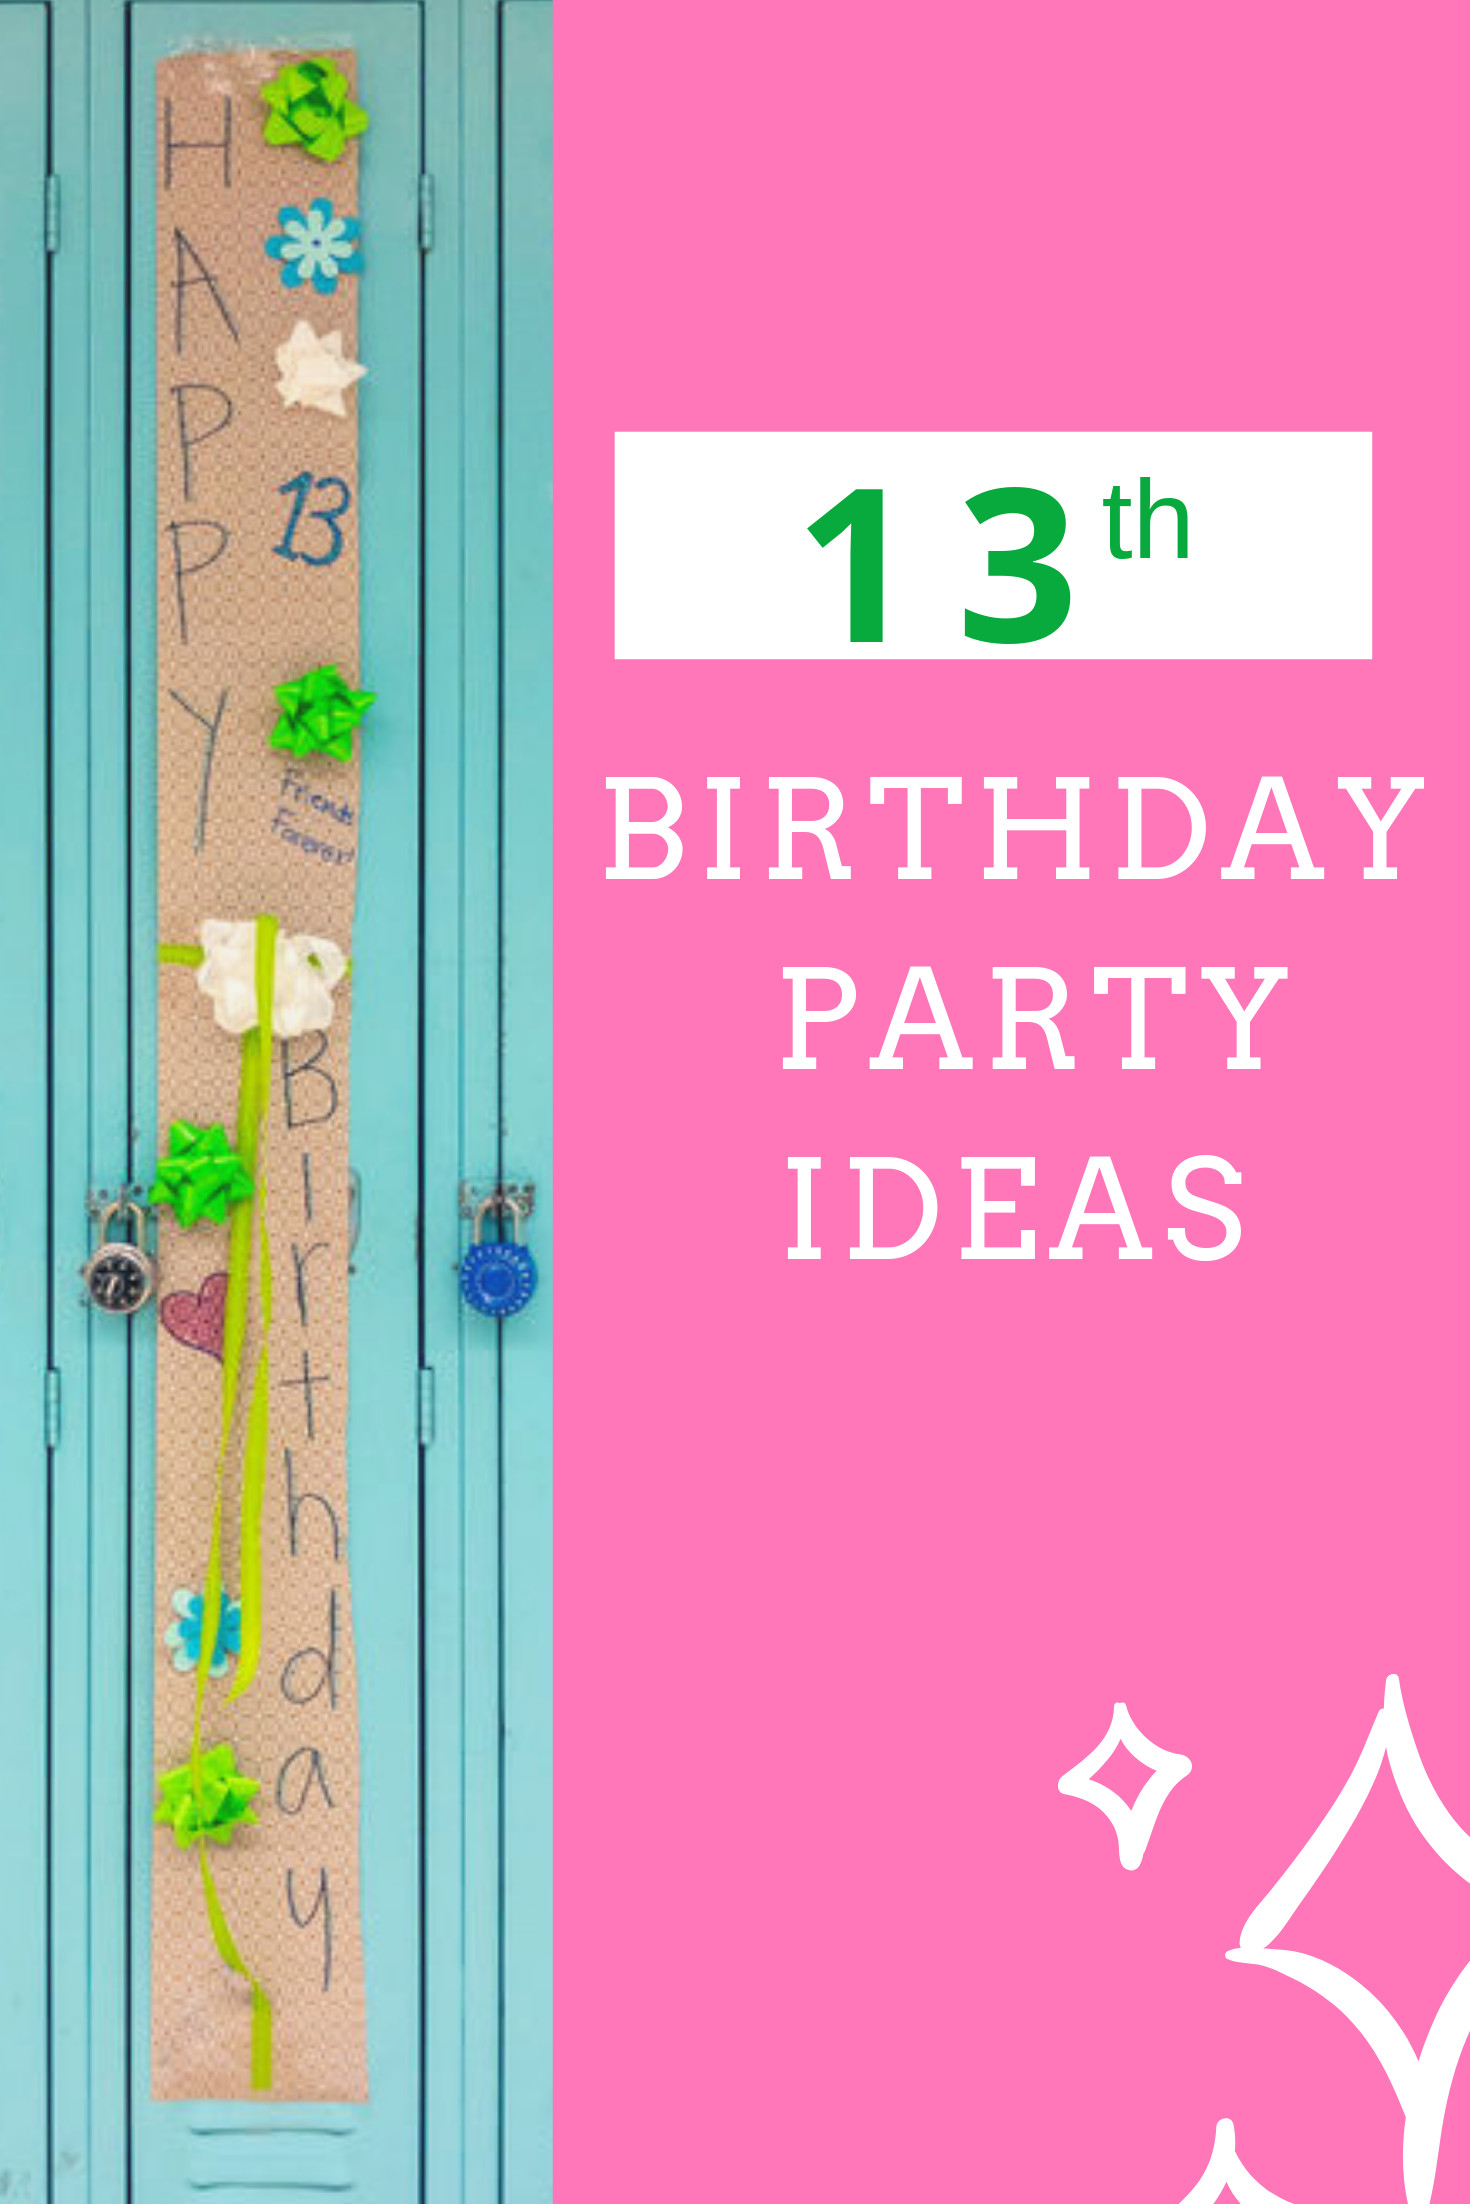 31Th Birthday Party Ideas
 13th Birthday Party Ideas For The Cool Mom • A Subtle Revelry